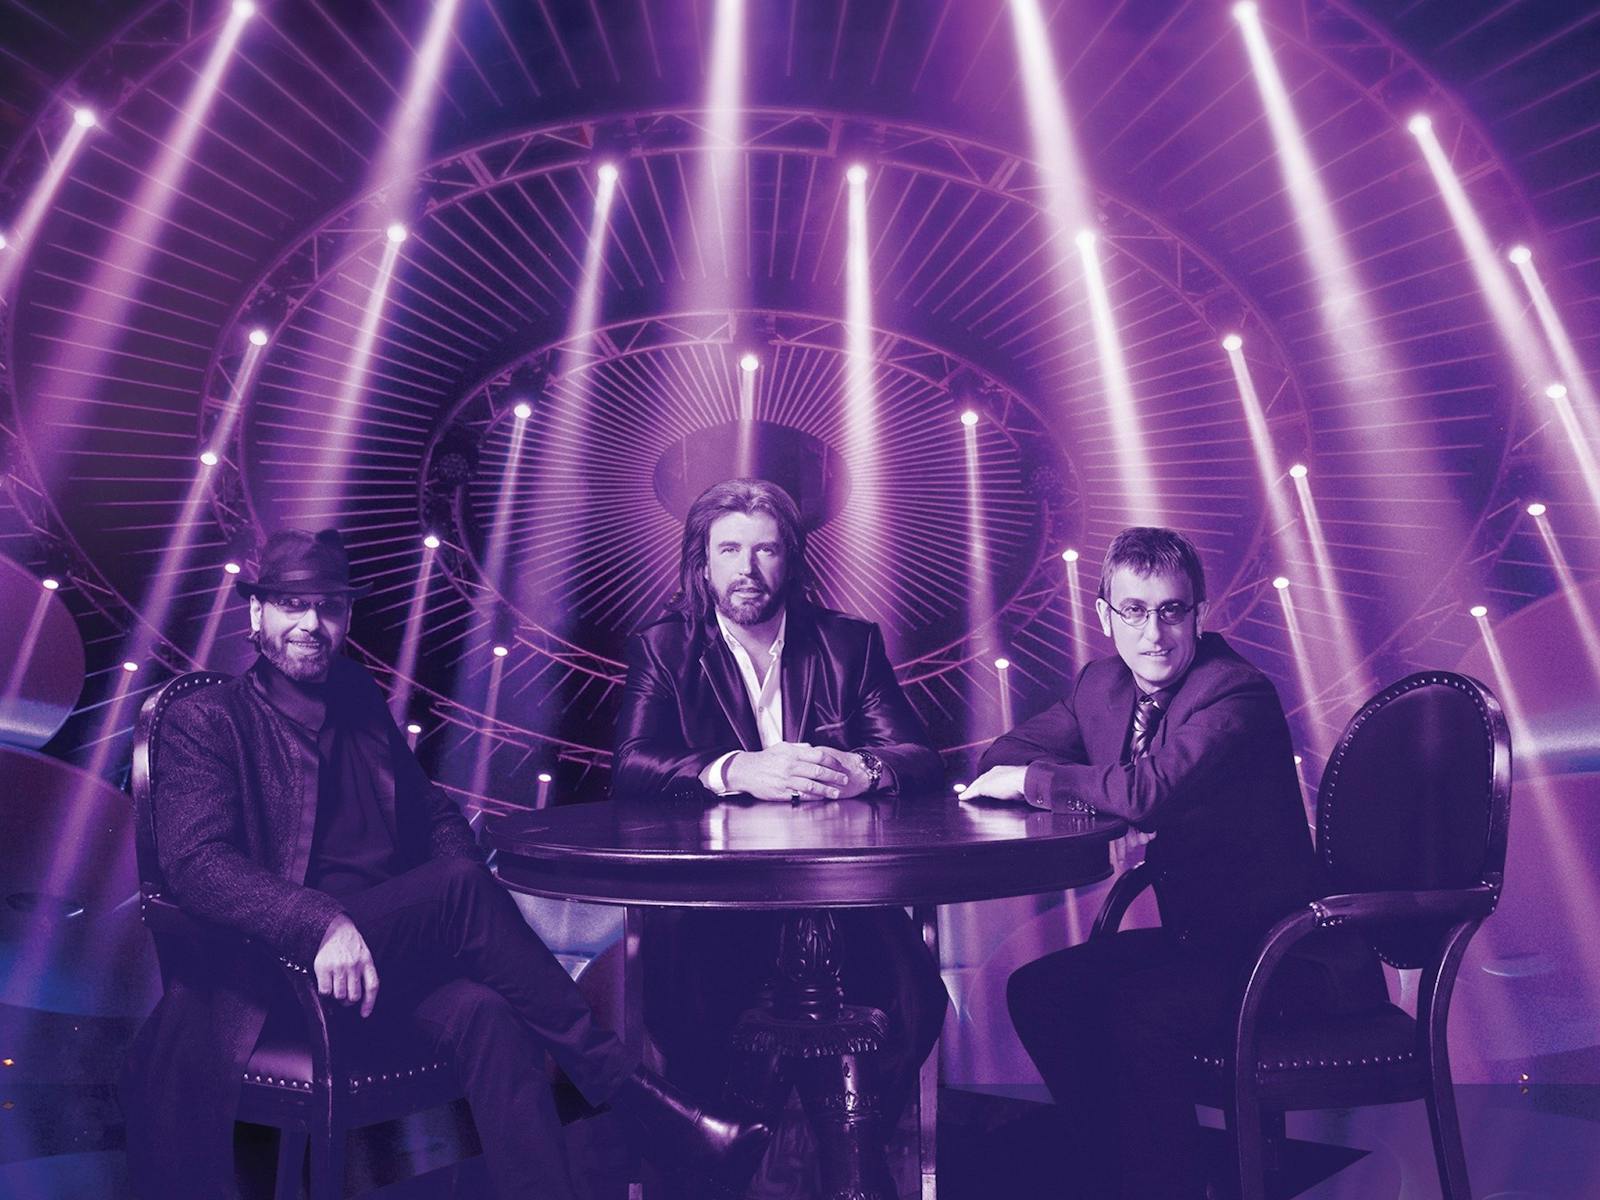 Image for The Australian Bee Gees Show - 25th Anniversary Tour - Dandenong